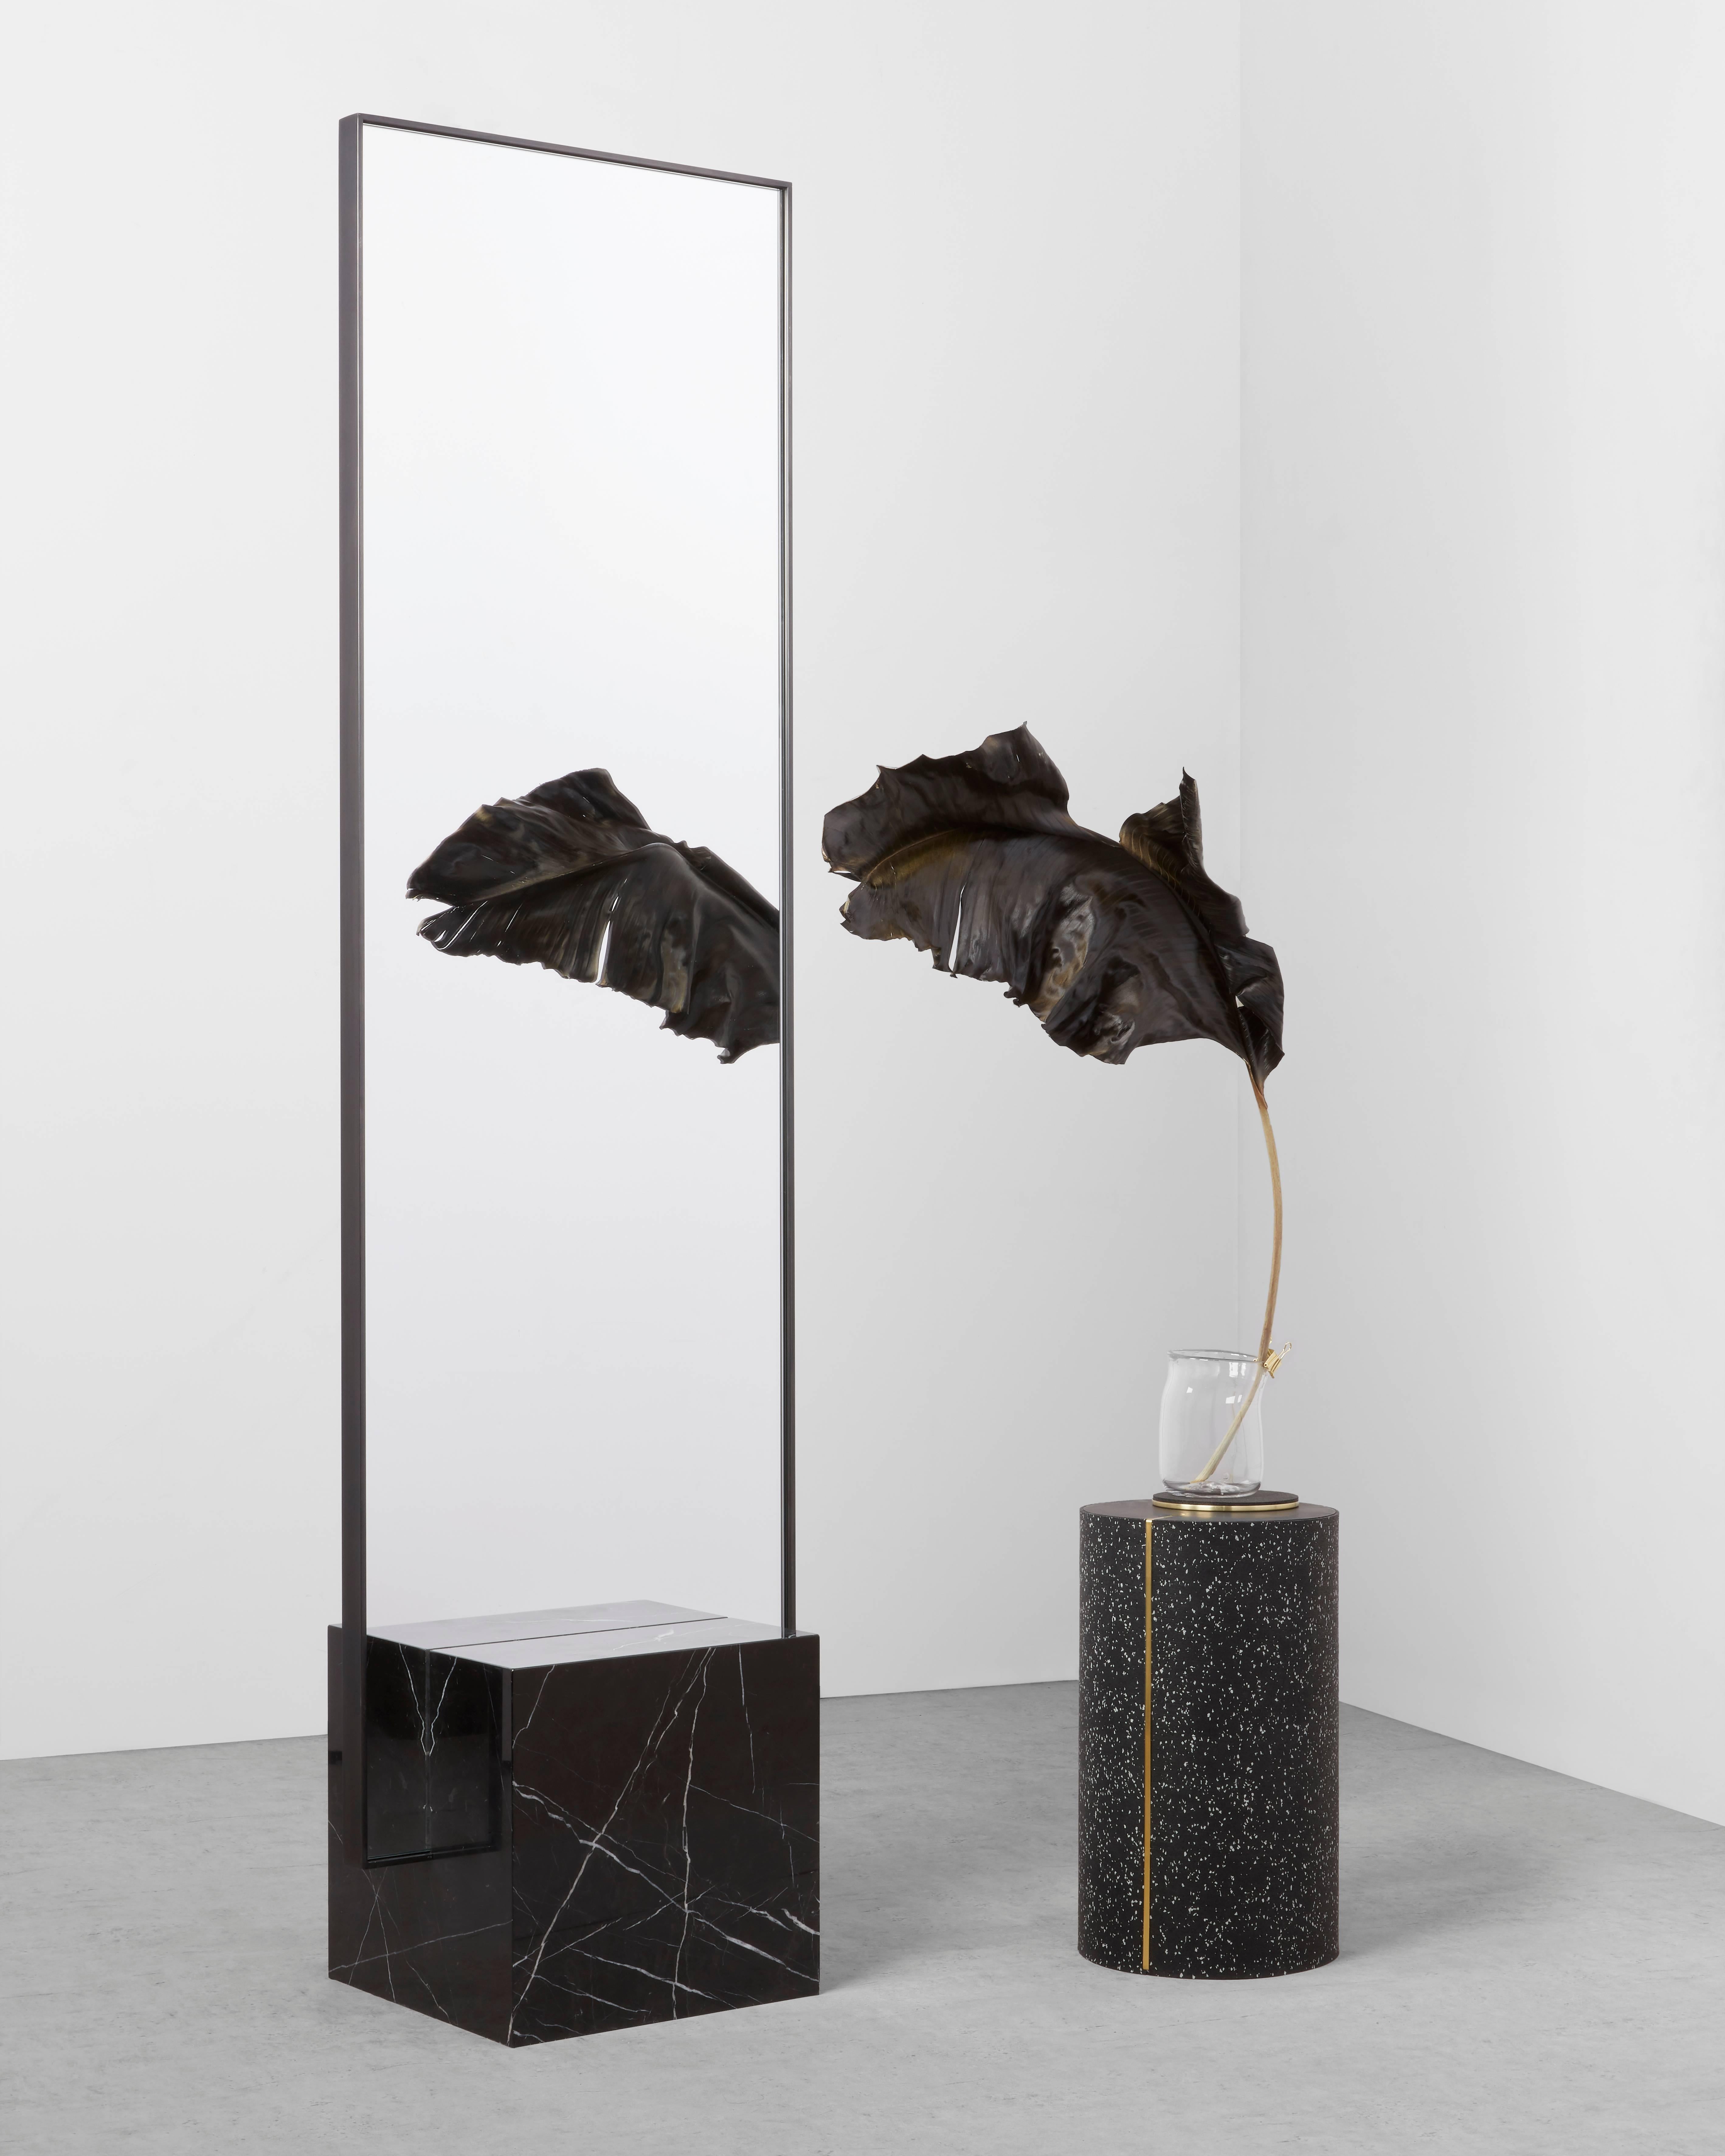 Other Nero Coexist Standing Mirror, Concrete Rubber CYL and Marble - 1stdibs New York  For Sale